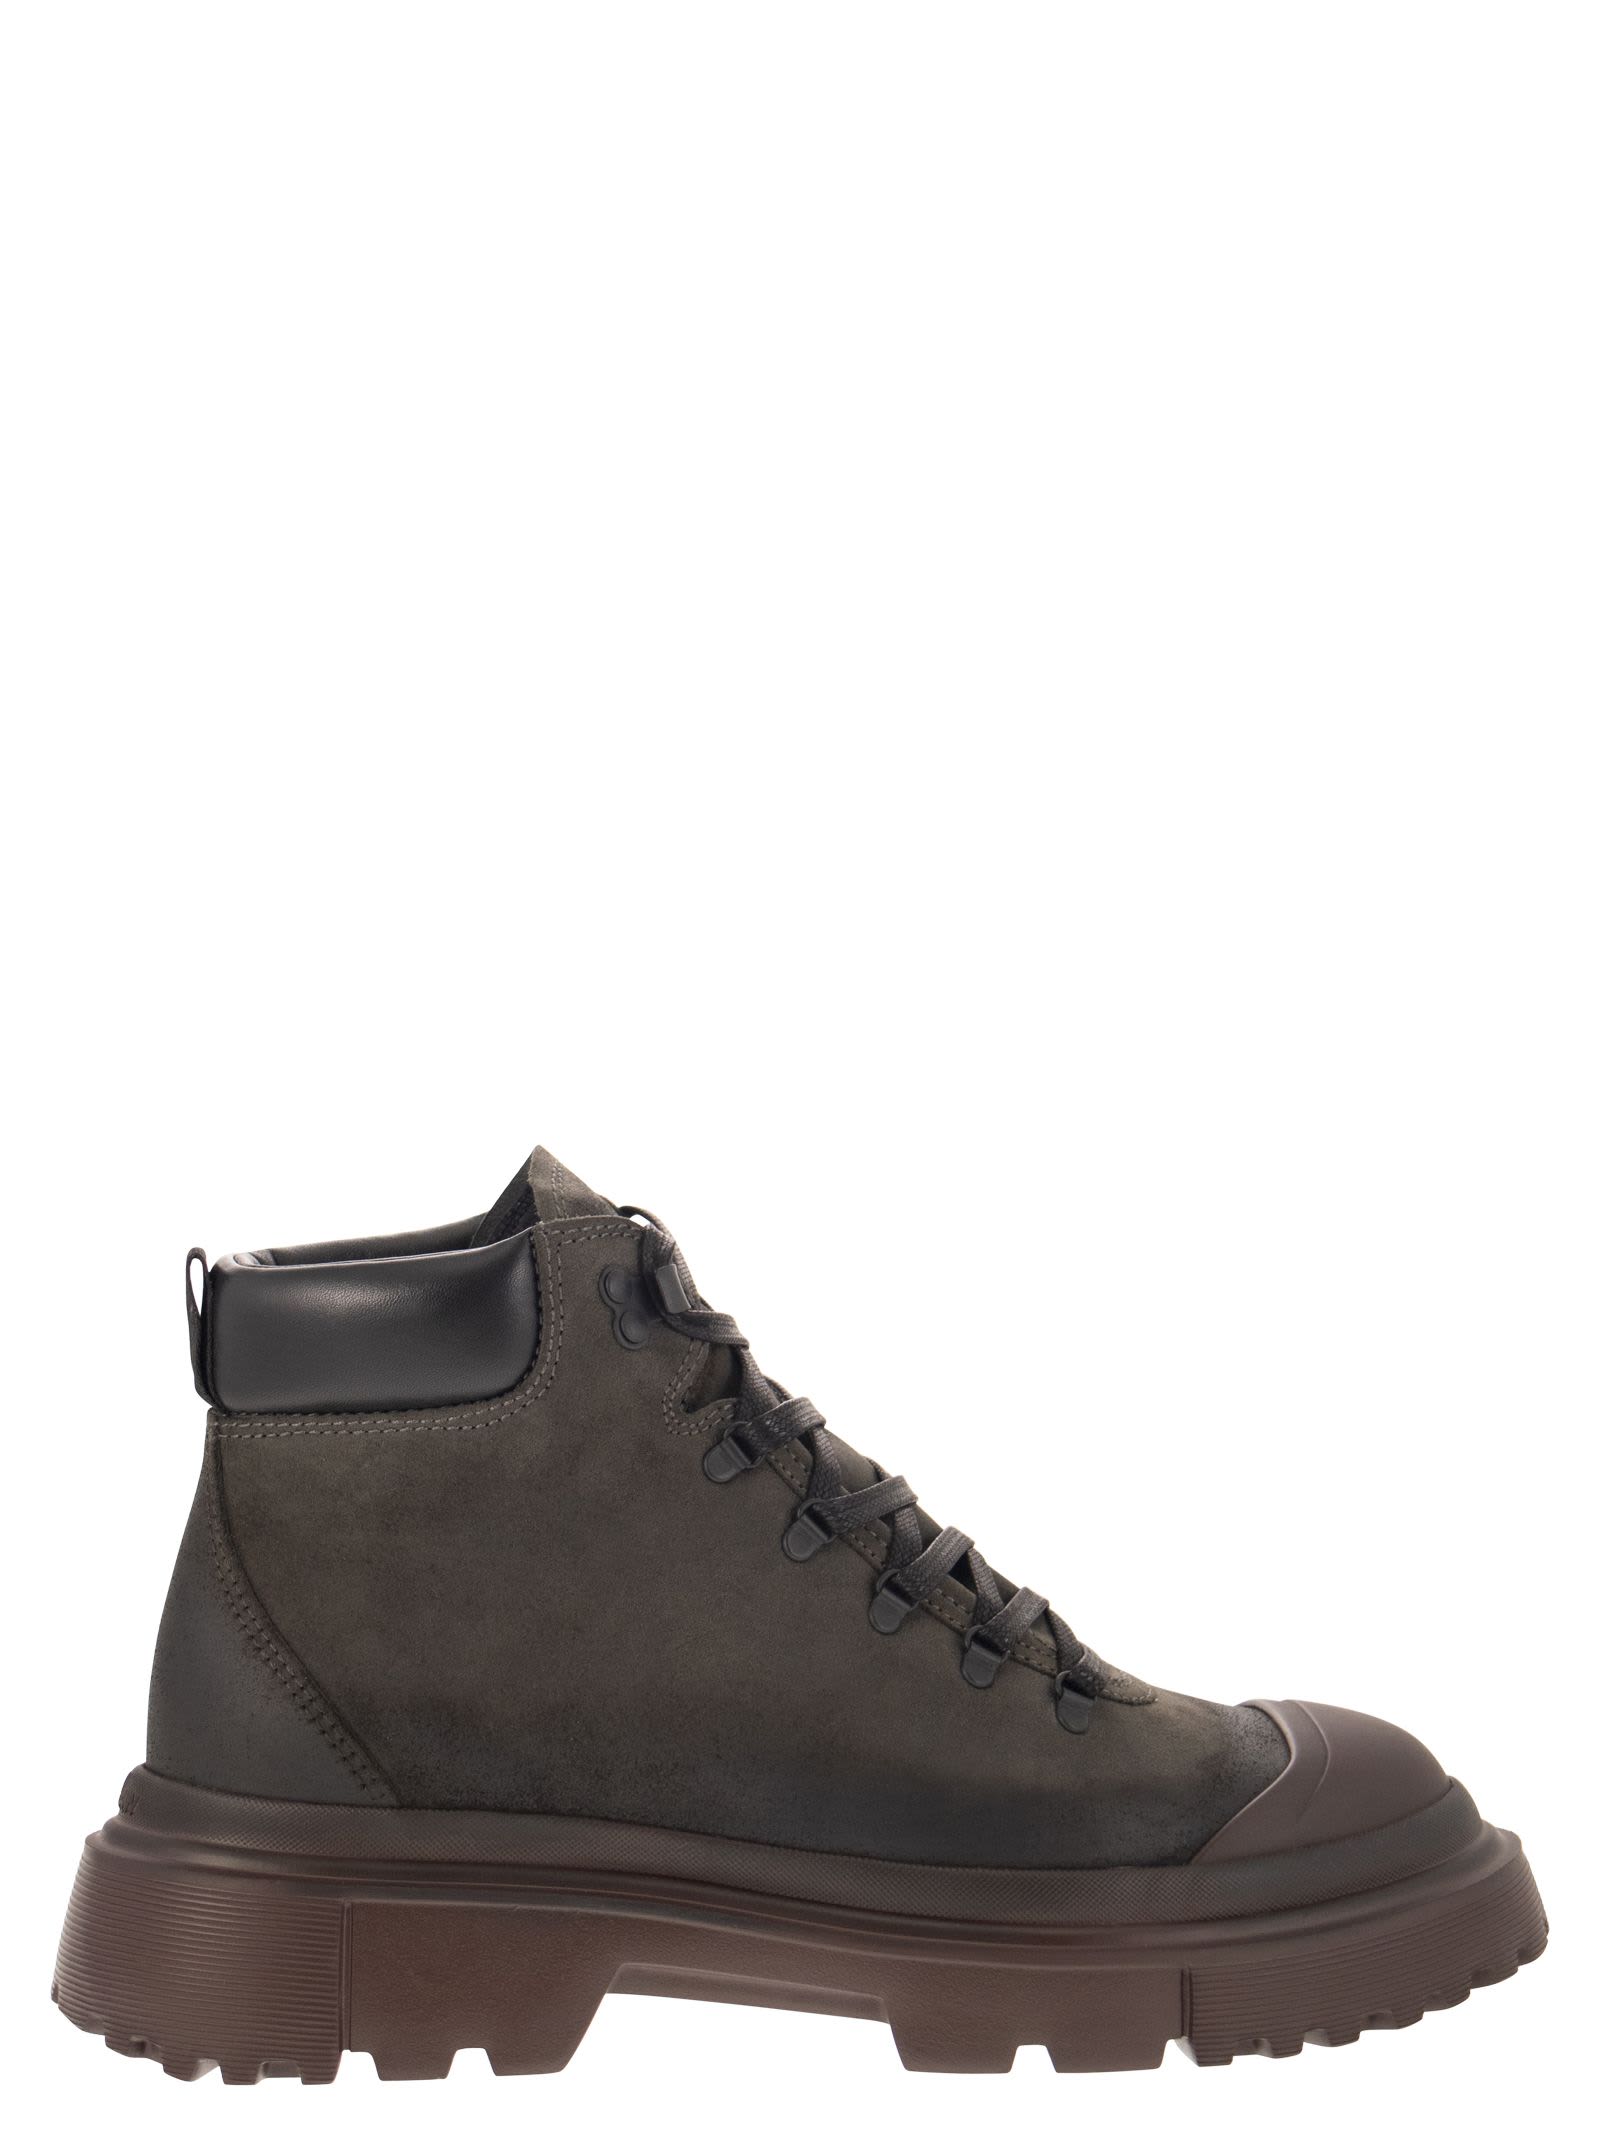 HOGAN GREASED NUBUCK LEATHER ANKLE BOOT